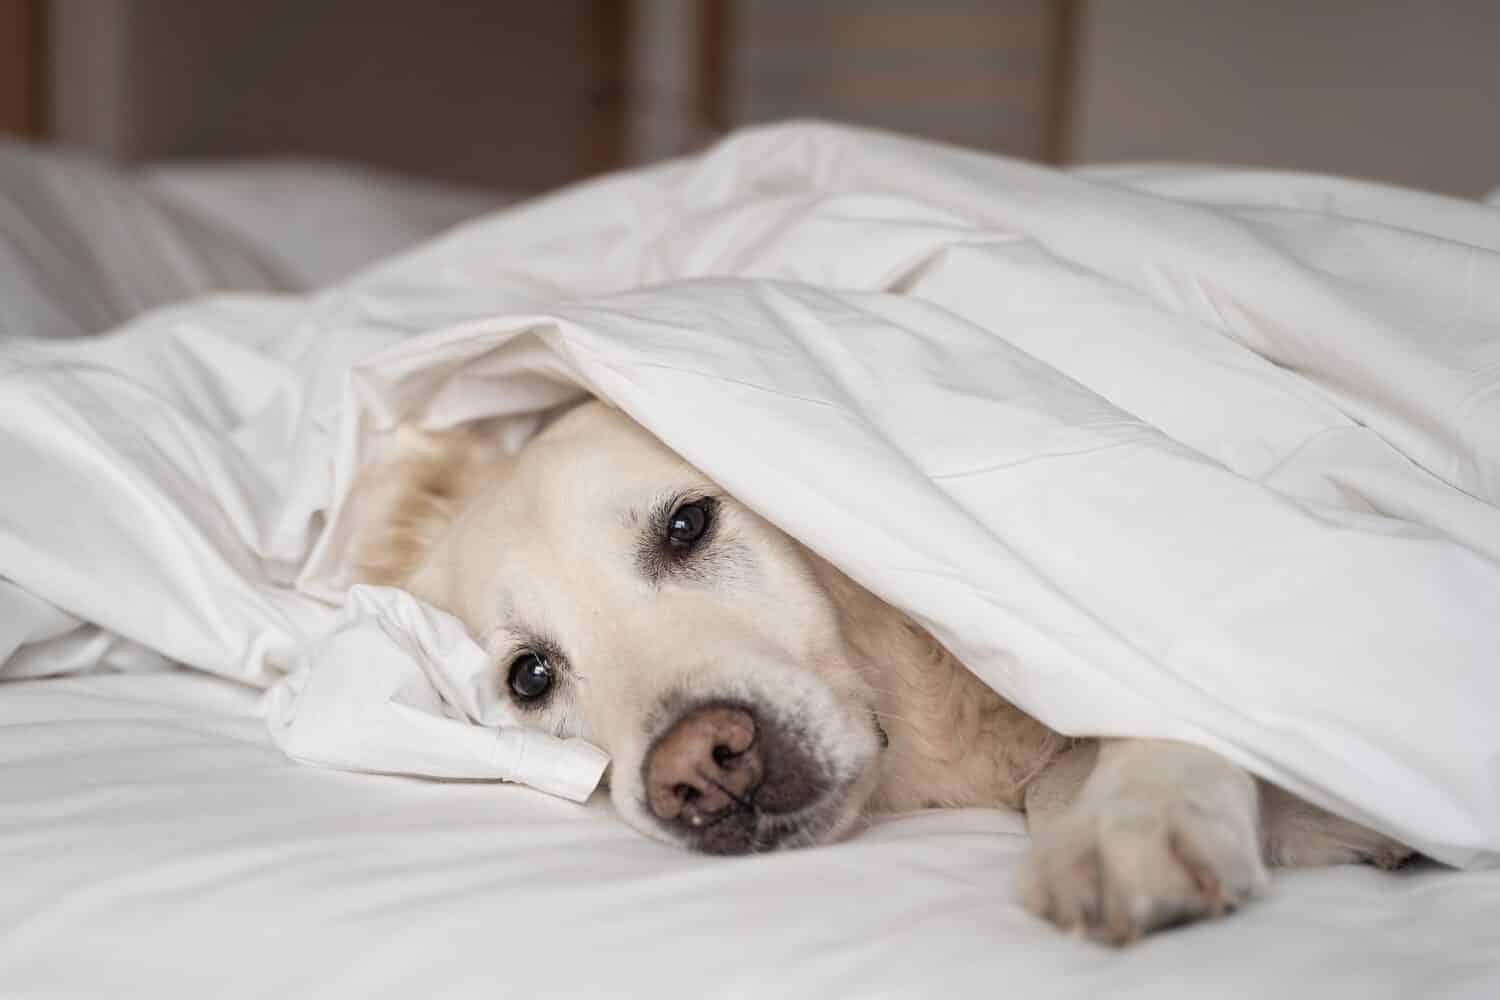 Sick dog lying under a white blanket in bed, representing the veterinary concept of care, comfort, and support for ill pets.